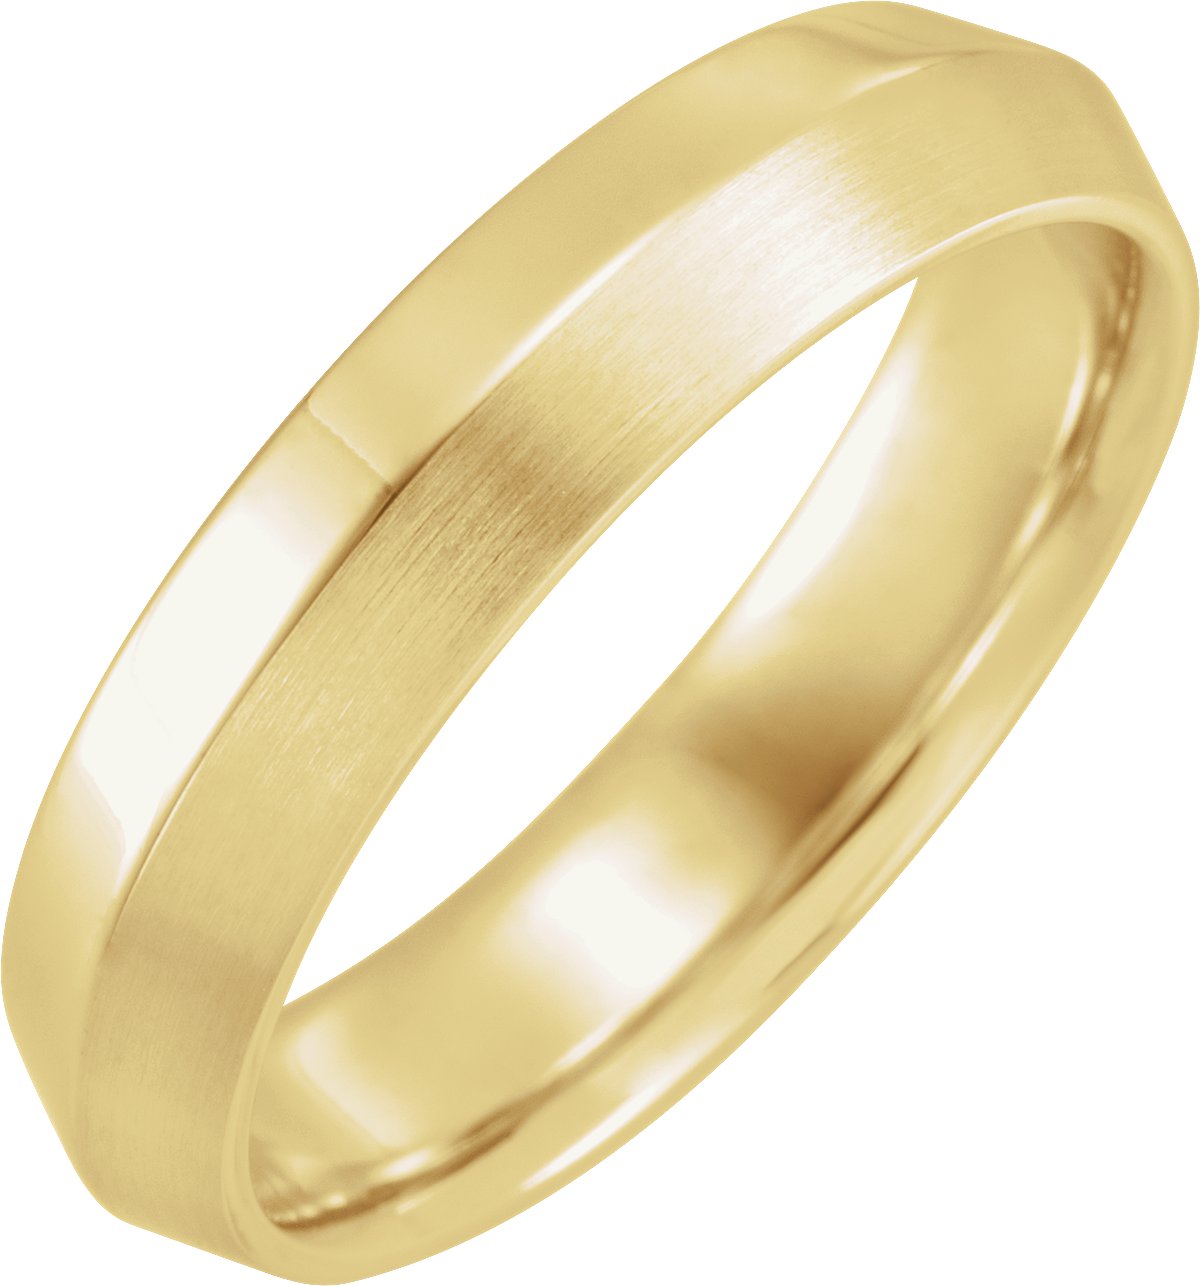 18K Yellow 9 mm Flat Comfort Fit Band Size 9.5